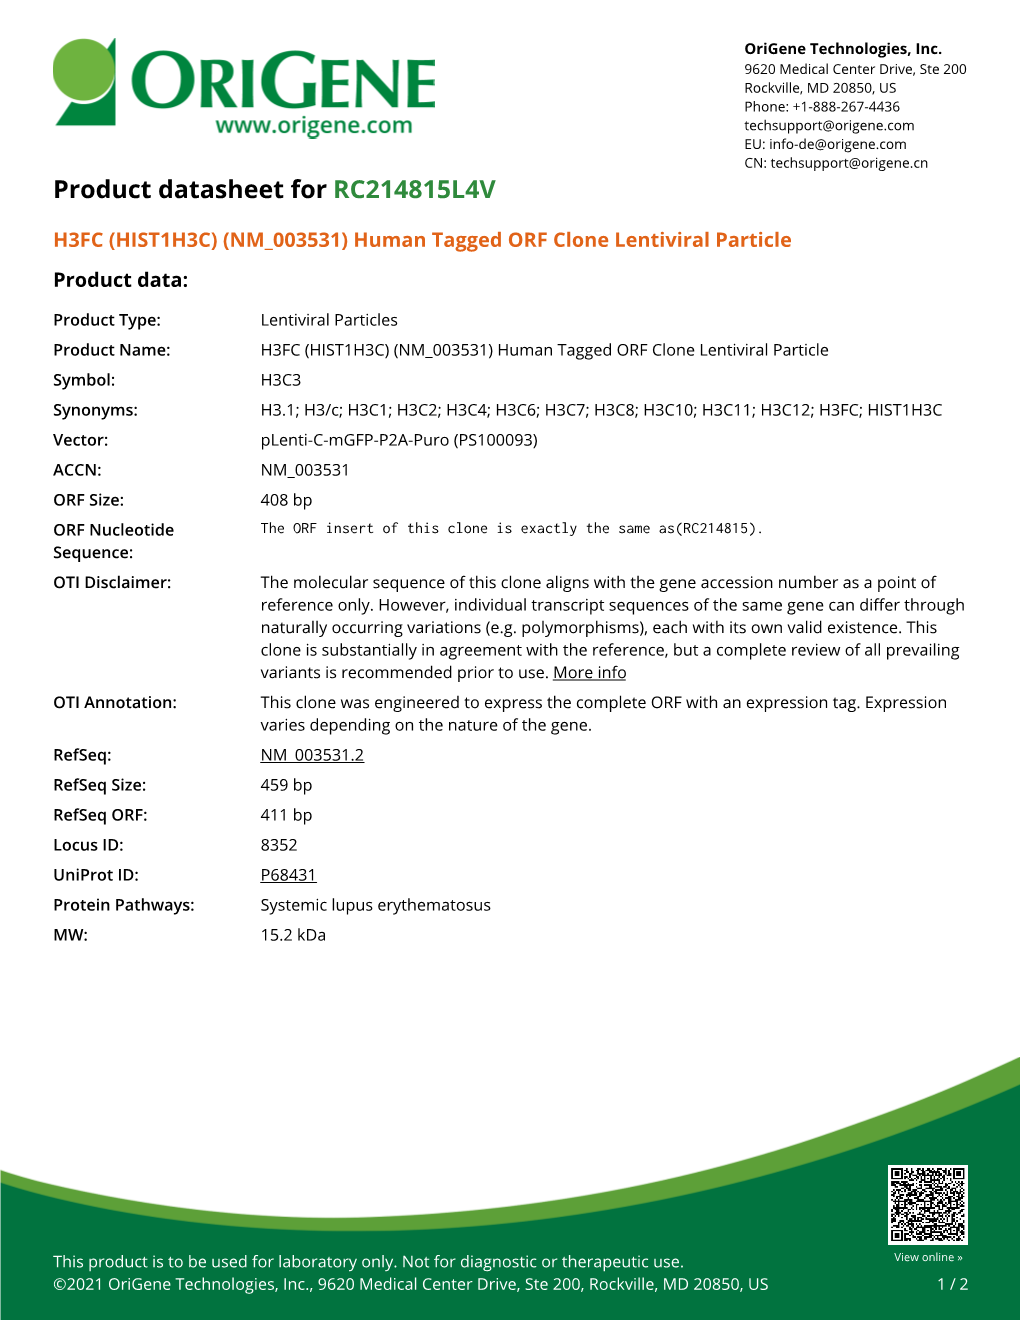 H3FC (HIST1H3C) (NM 003531) Human Tagged ORF Clone Lentiviral Particle Product Data